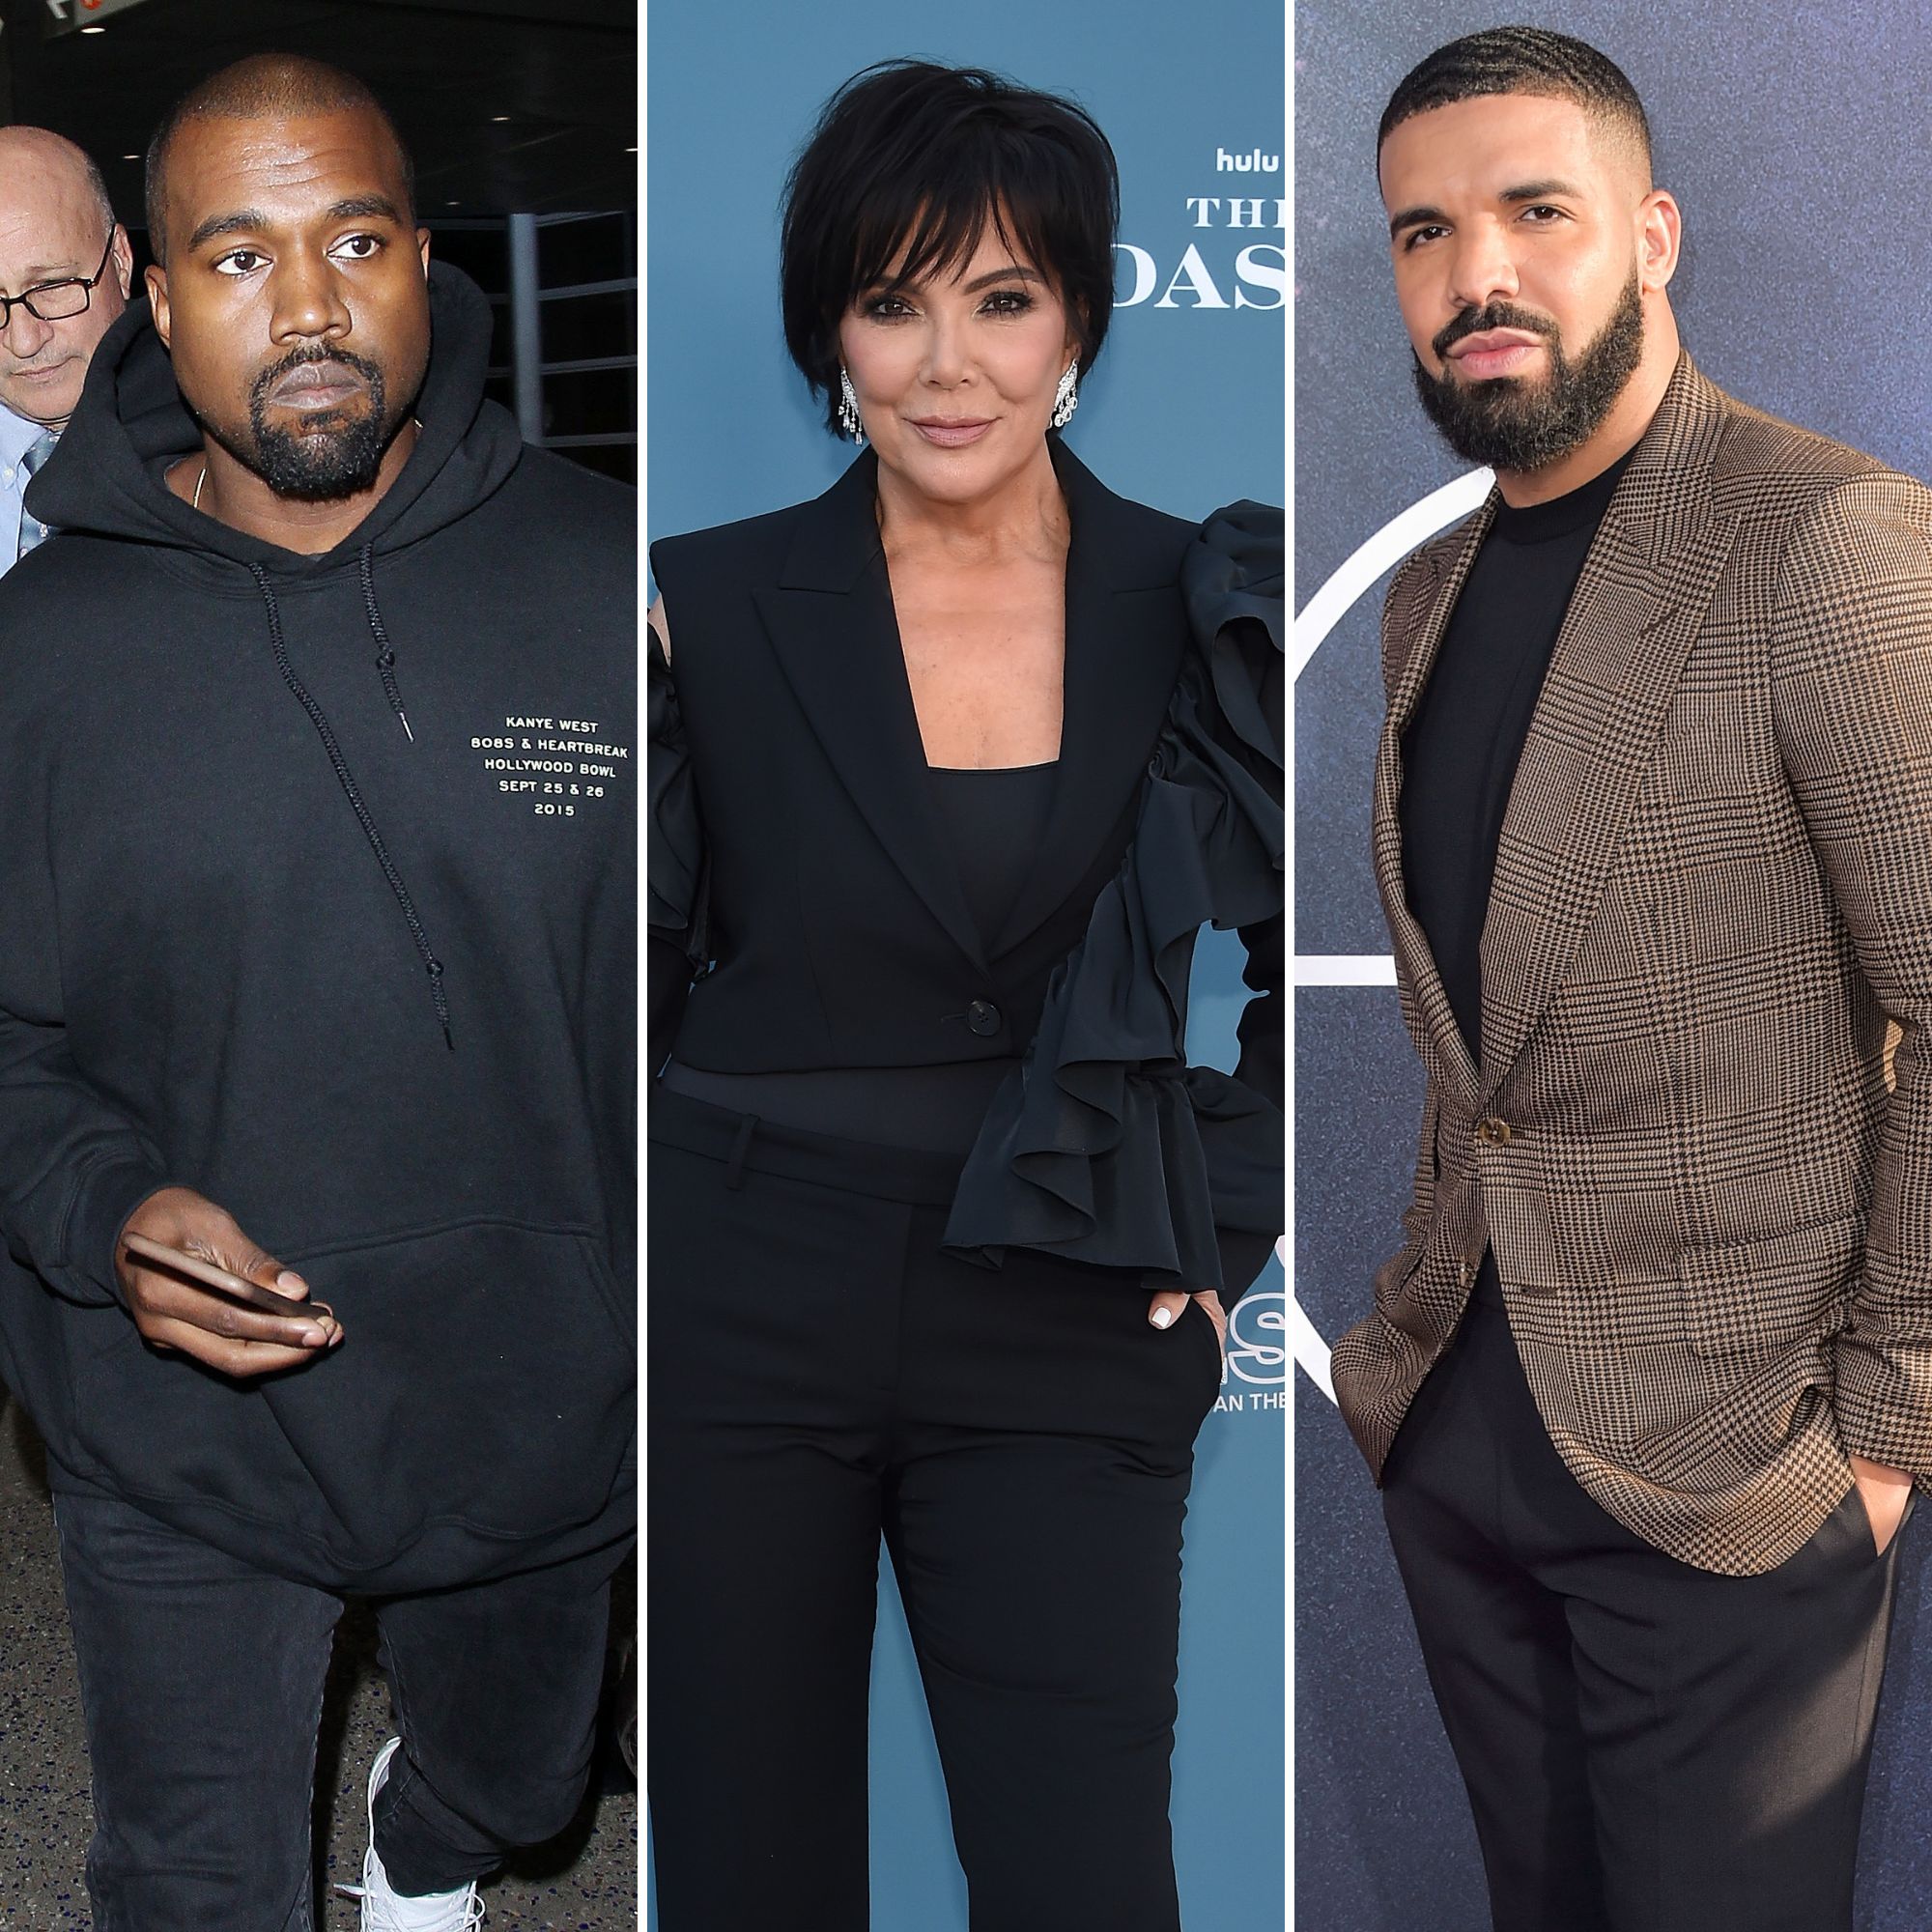 Khloe Terae Fucking - Kanye West Stands By Claim Drake Had Sex With Kris Jenner